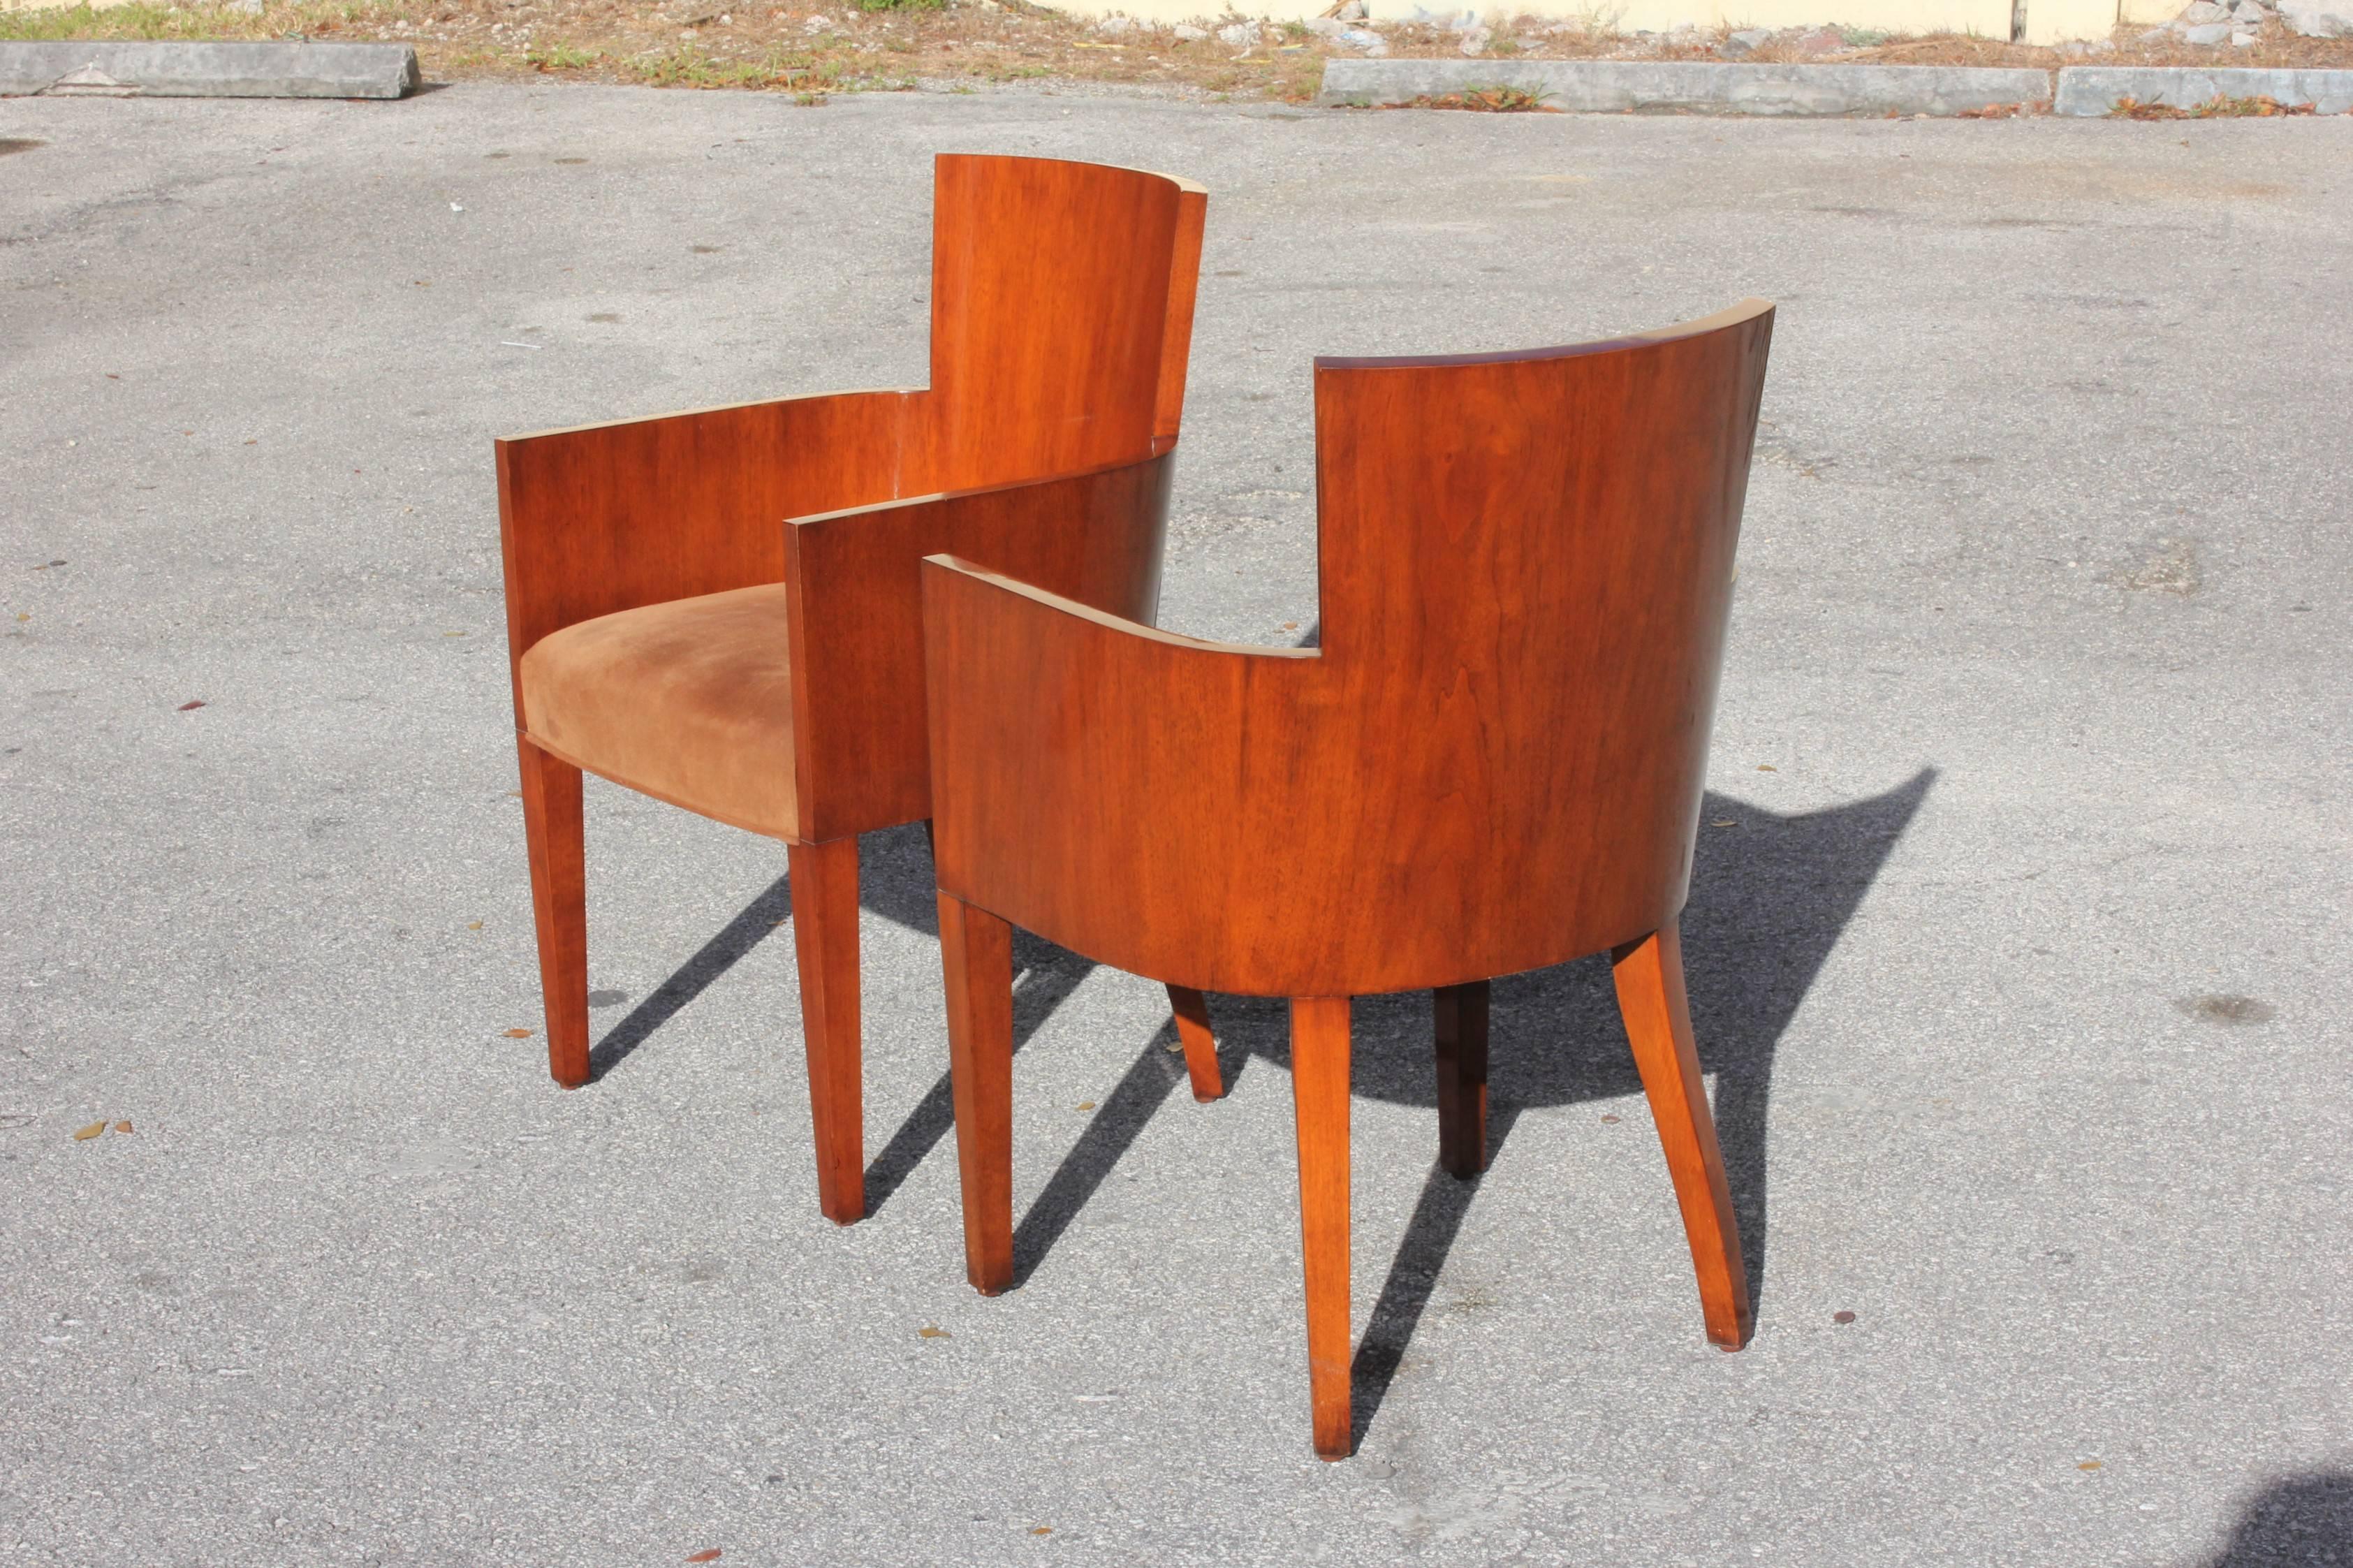 Beautiful pair of solid mahogany Ralph Lauren modern Hollywood armchairs, elegant barrel-back solid mahogany chairs with curvilinear arms and leather upholstery. Each armchair have signature brass plaque underneath, the two armchair mahogany are in